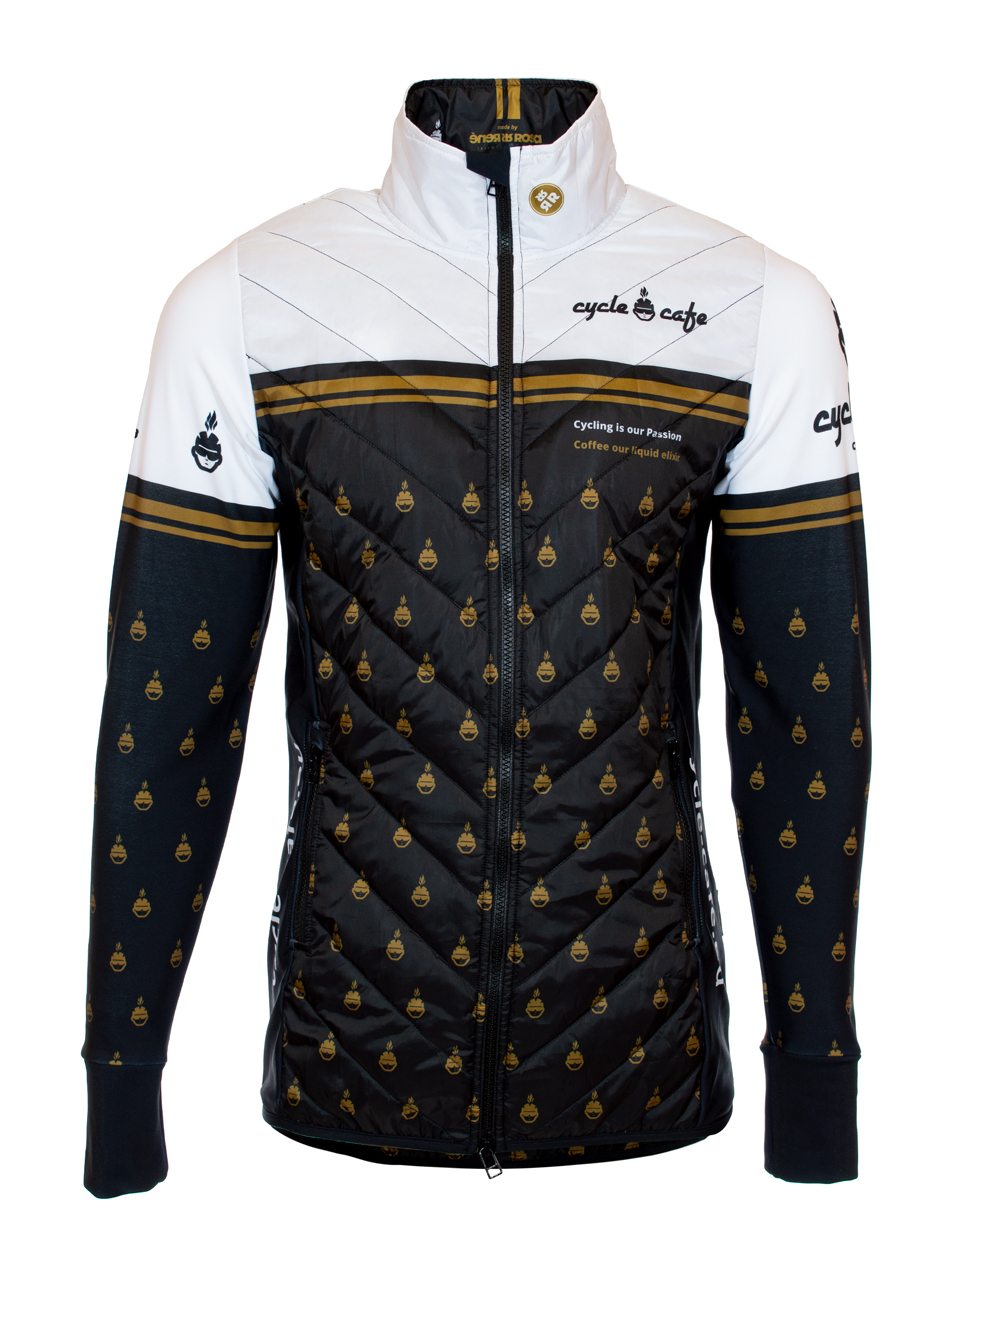 Multisport Steppjacke Ultimate RRT210M / CycleCafe Special Edition